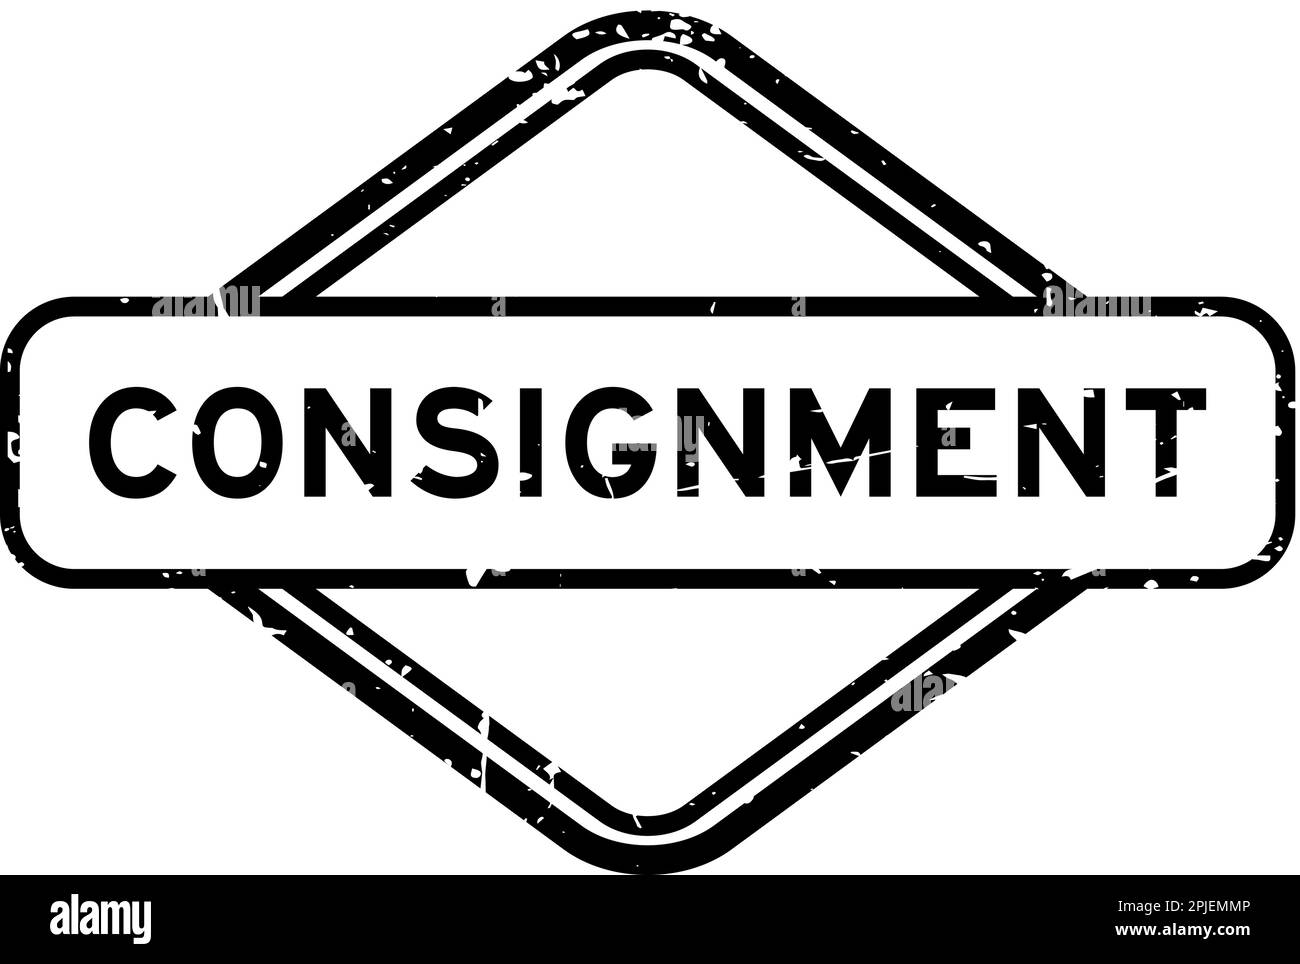 Consignment shop goods Stock Vector Images - Alamy